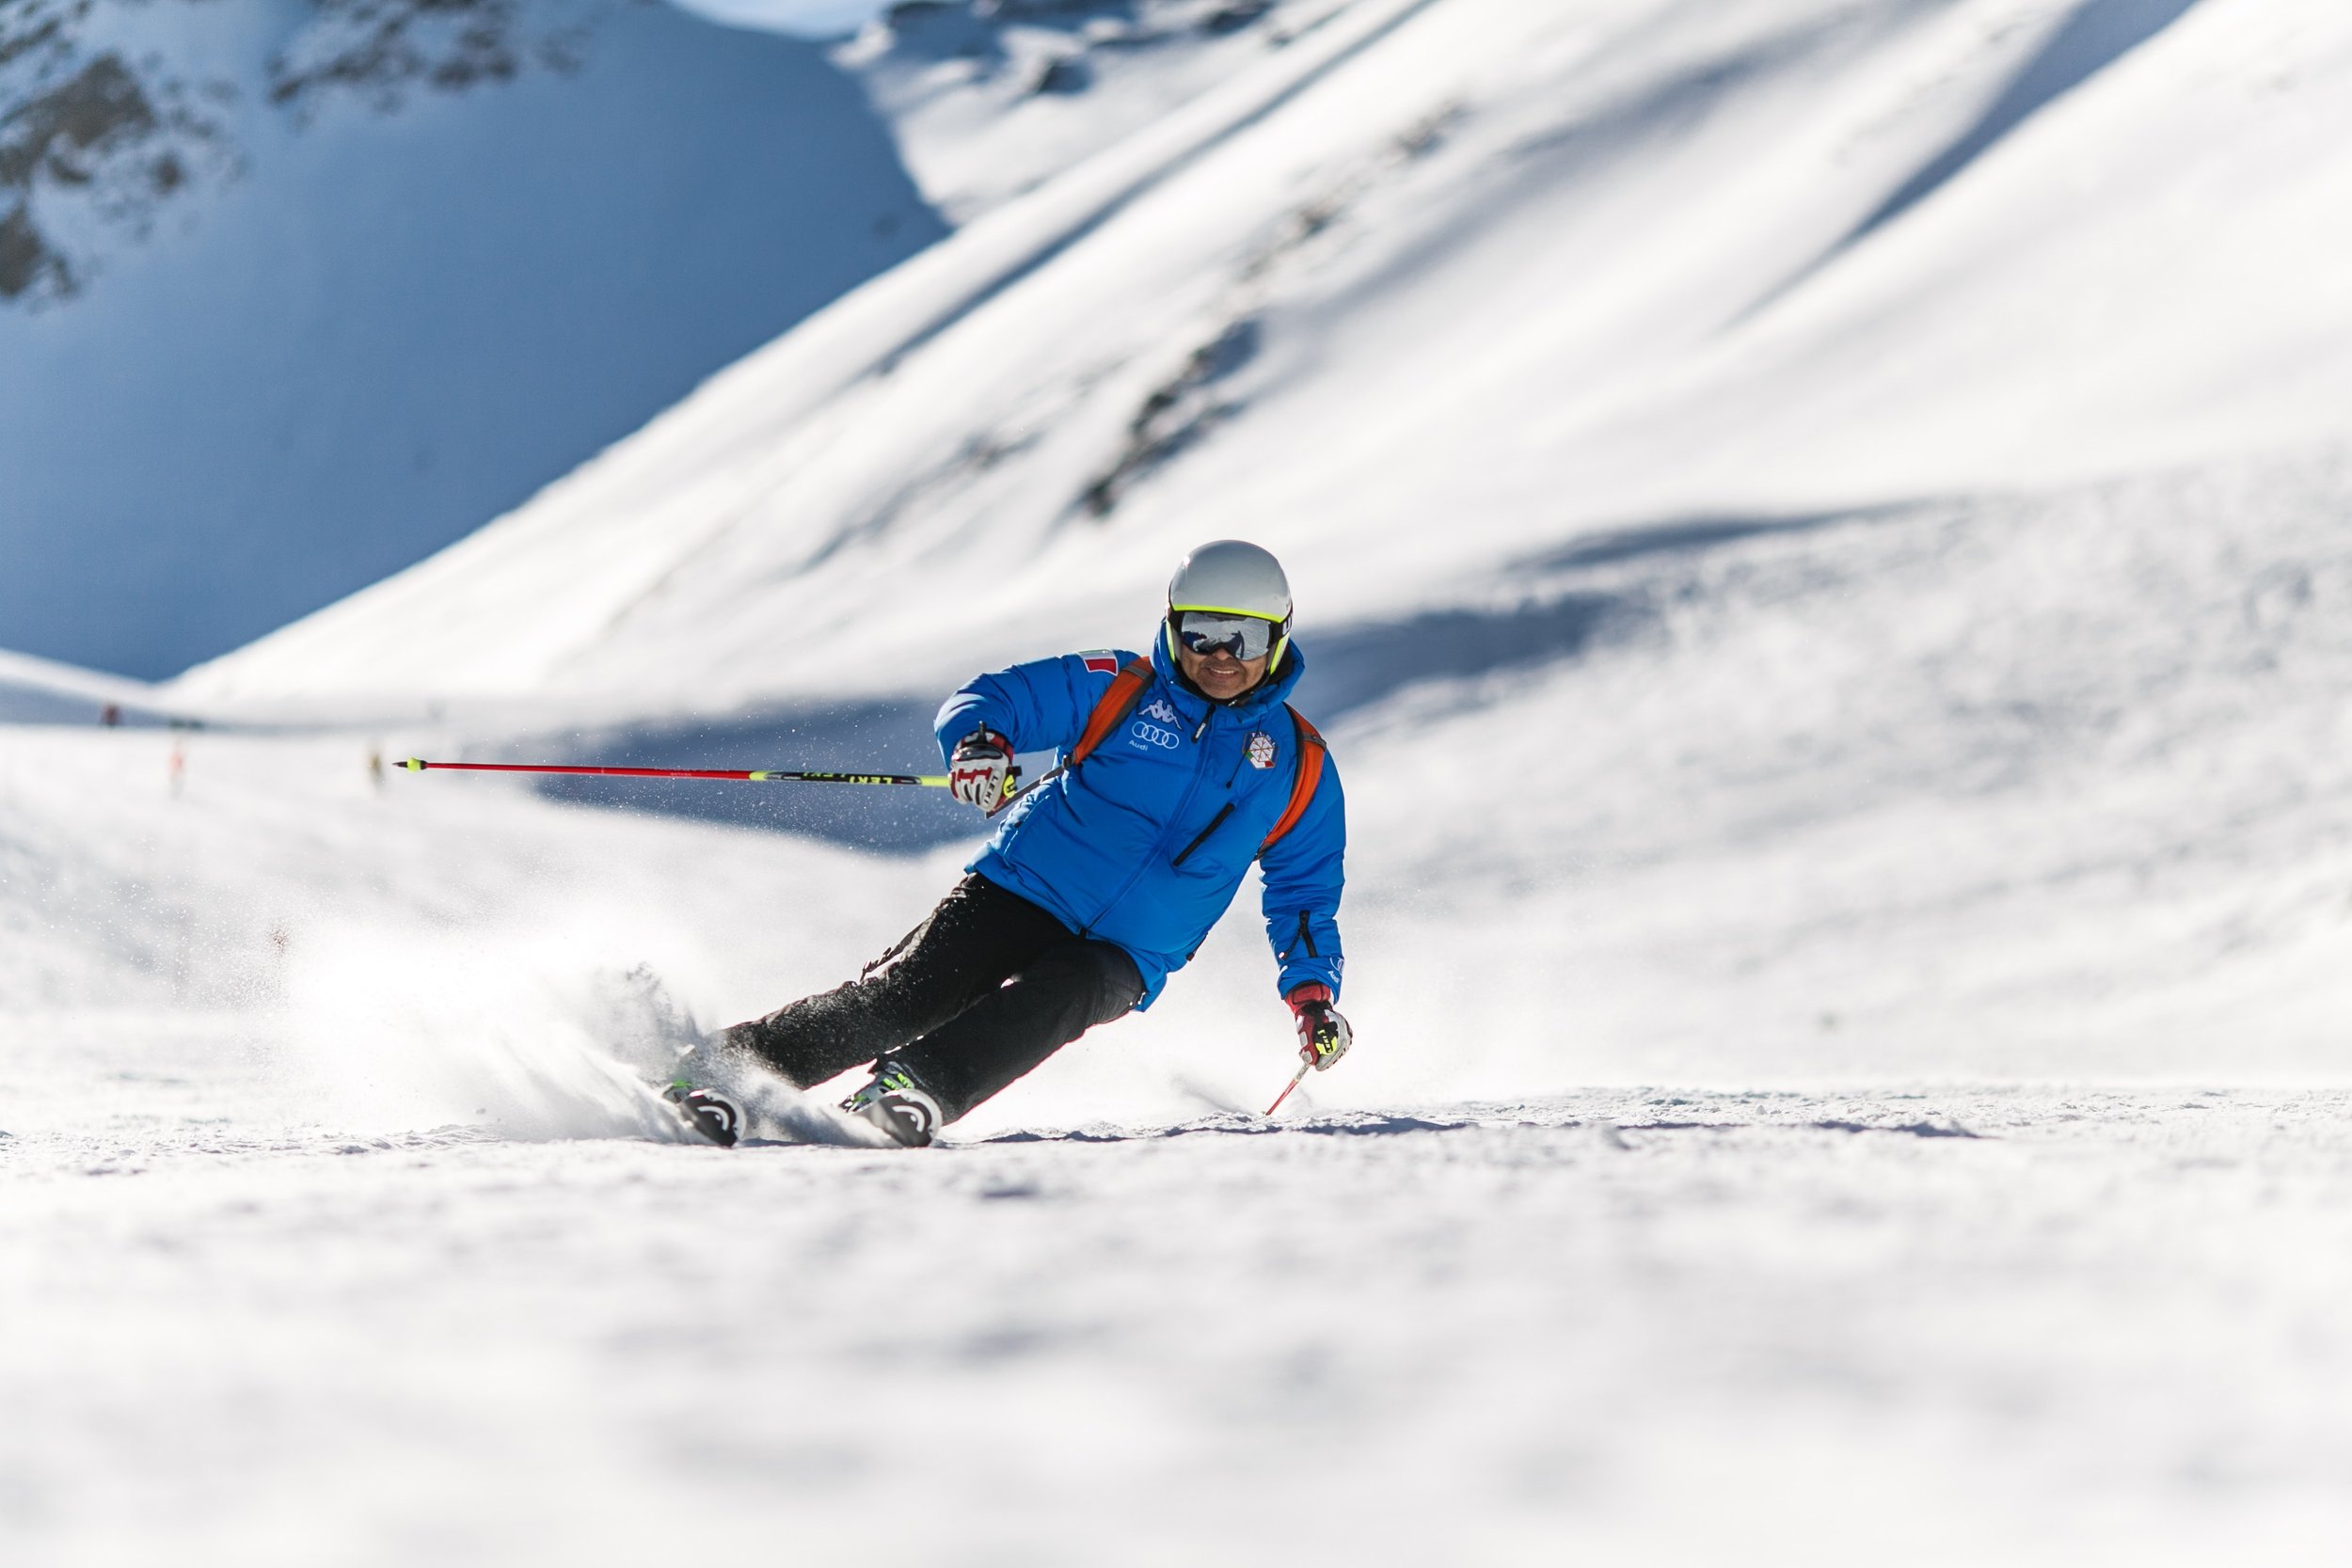 Downhill skiing at Val d'Isère in the Espace Killy ski area